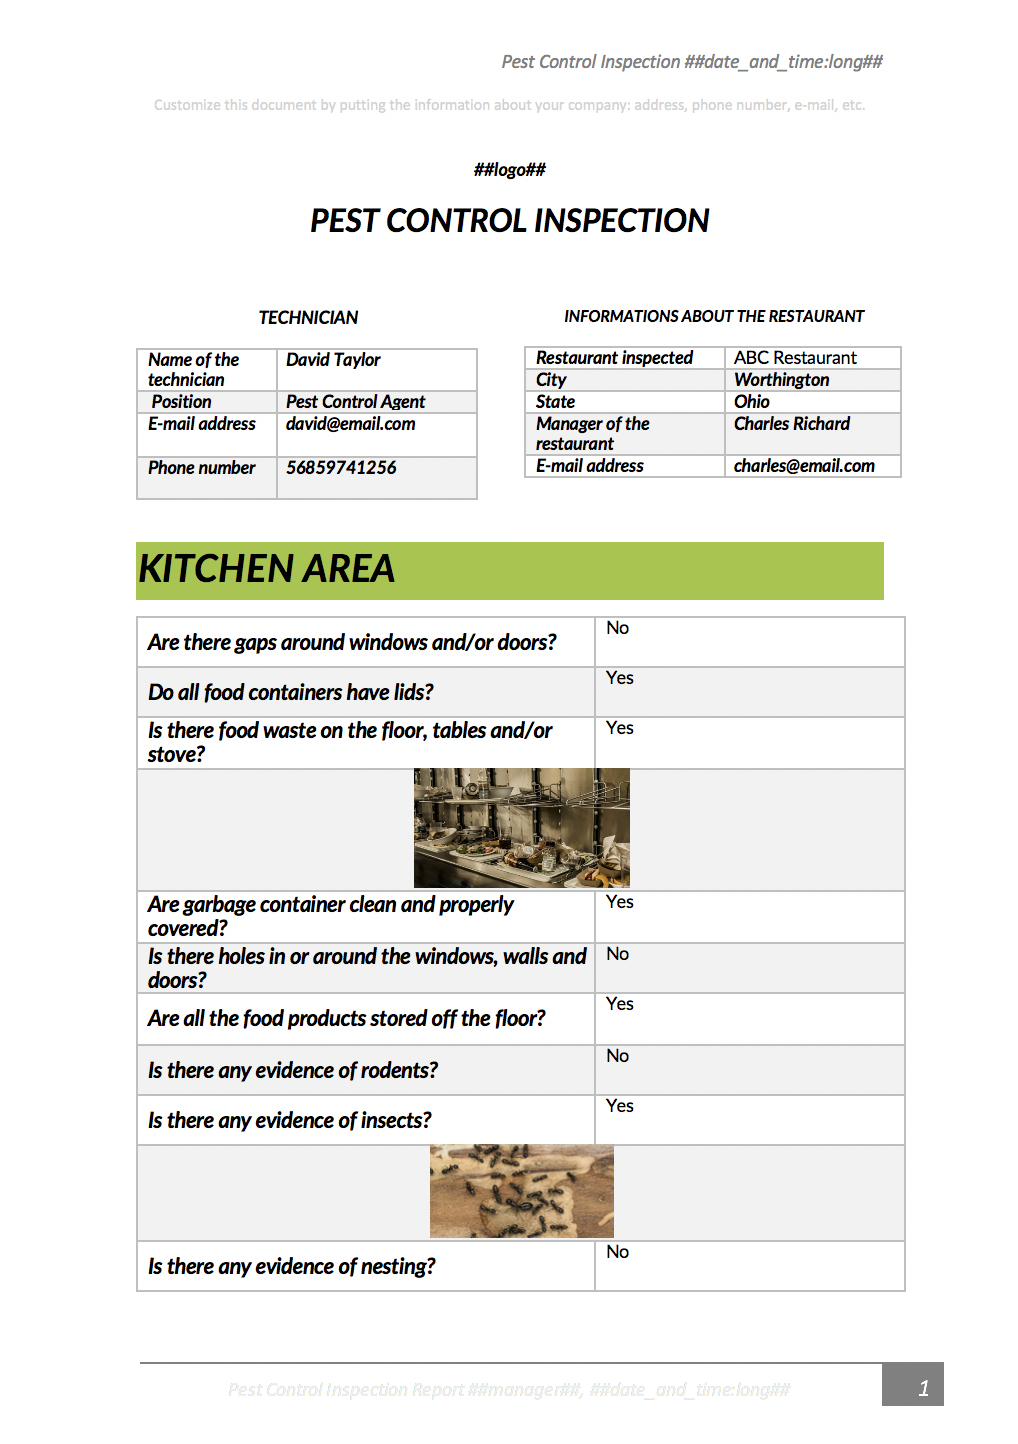 Pest Control Inspection With Kizeo Forms From Your Cellphone For Pest Control Report Template